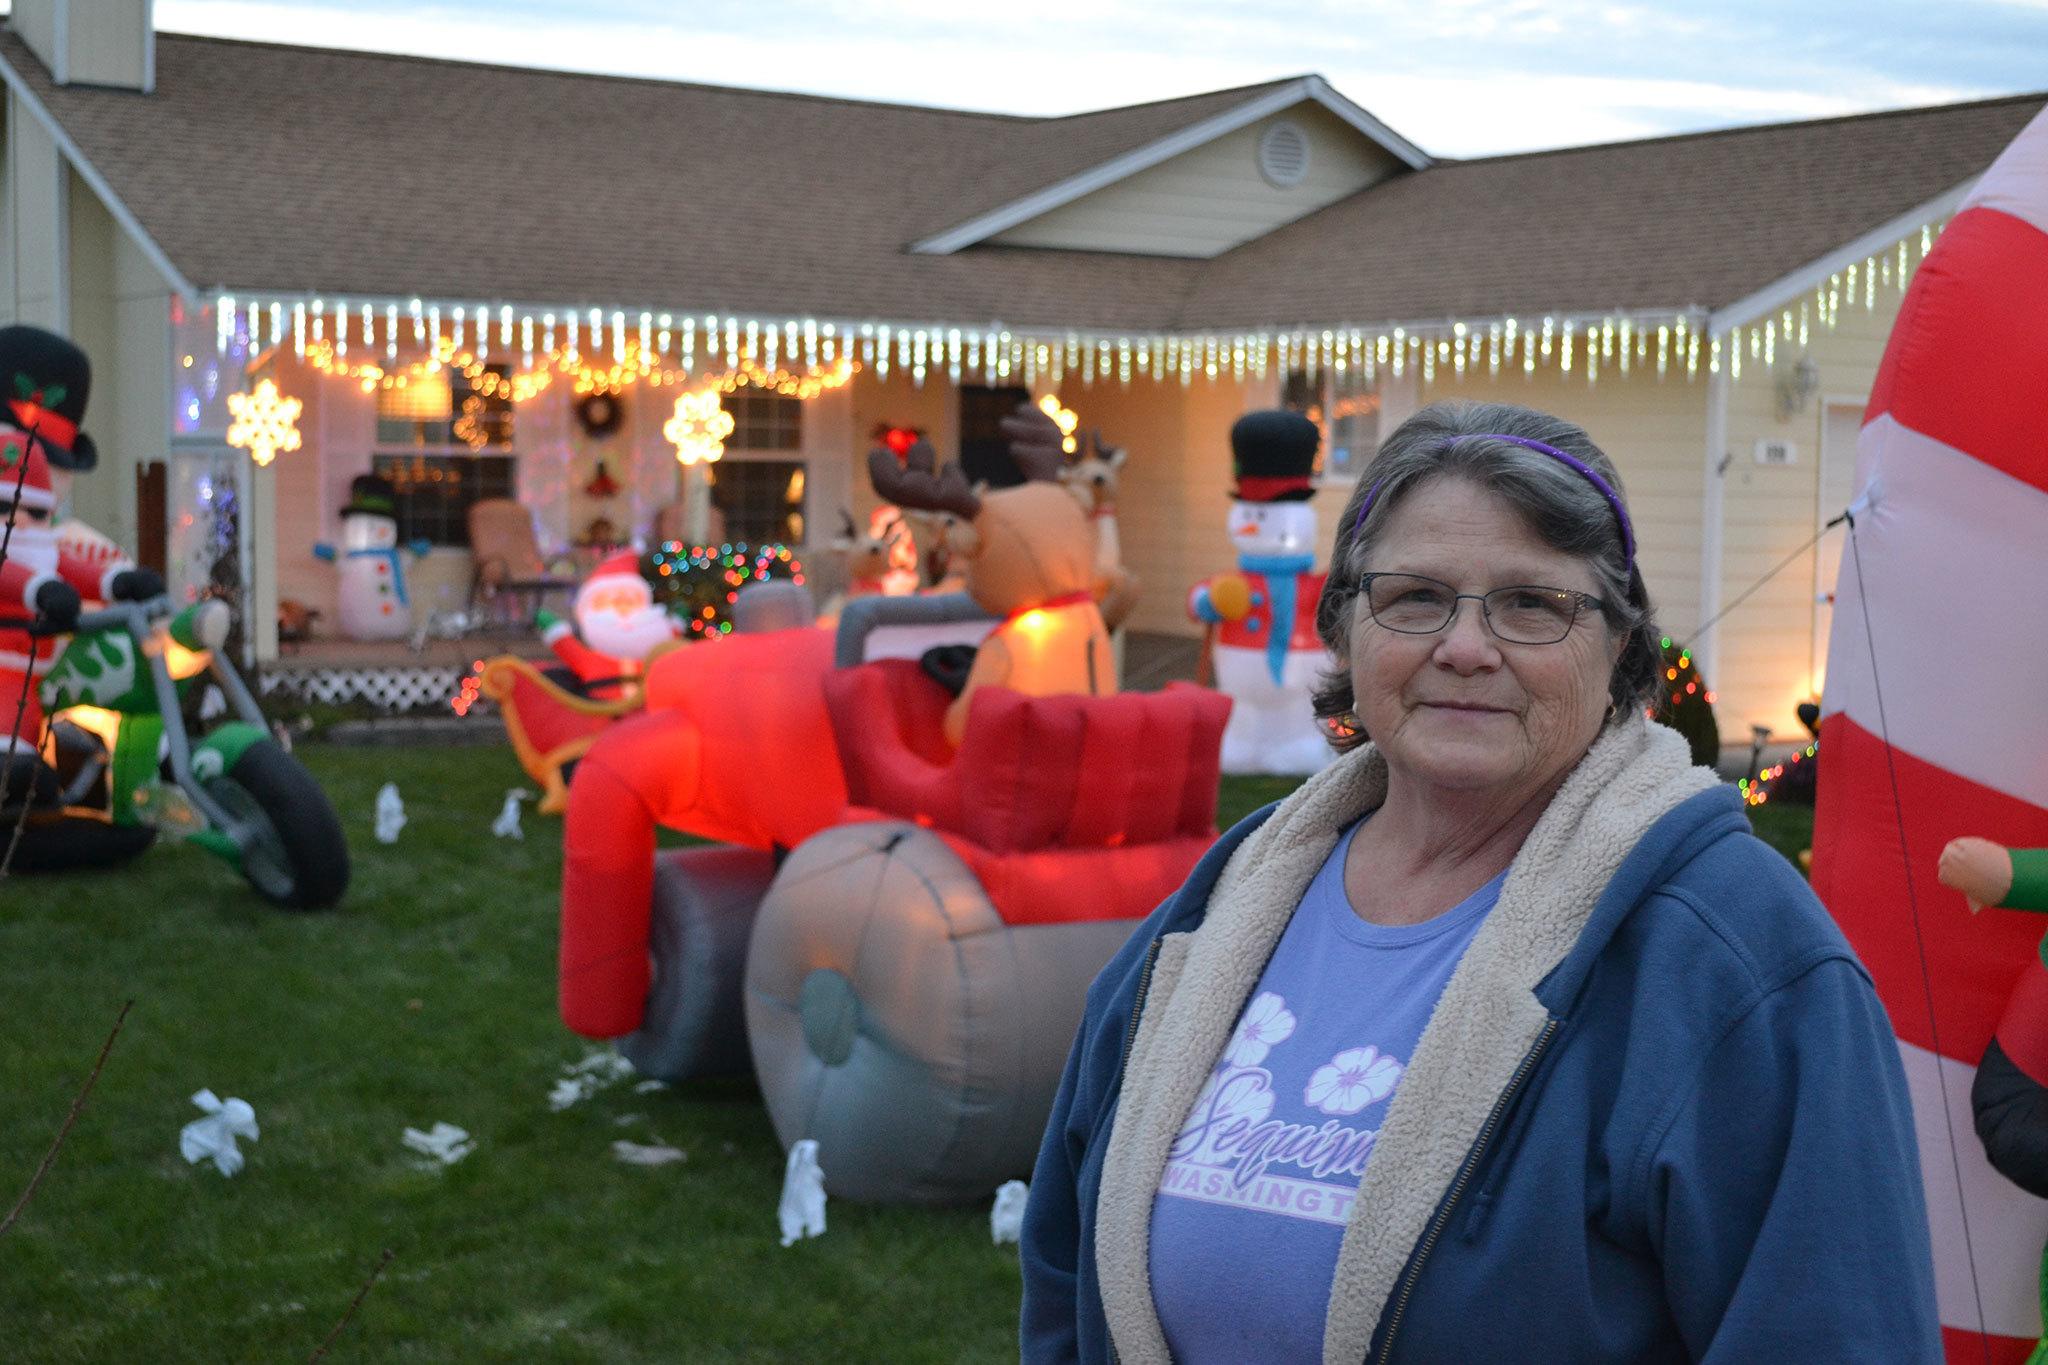 Mary Fisher of West Sylvester Court in Sequim says Christmas is her favorite time of year and she loves decorating for it each year. “I just love it,” she said. Sequim Gazette photo by Matthew Nash